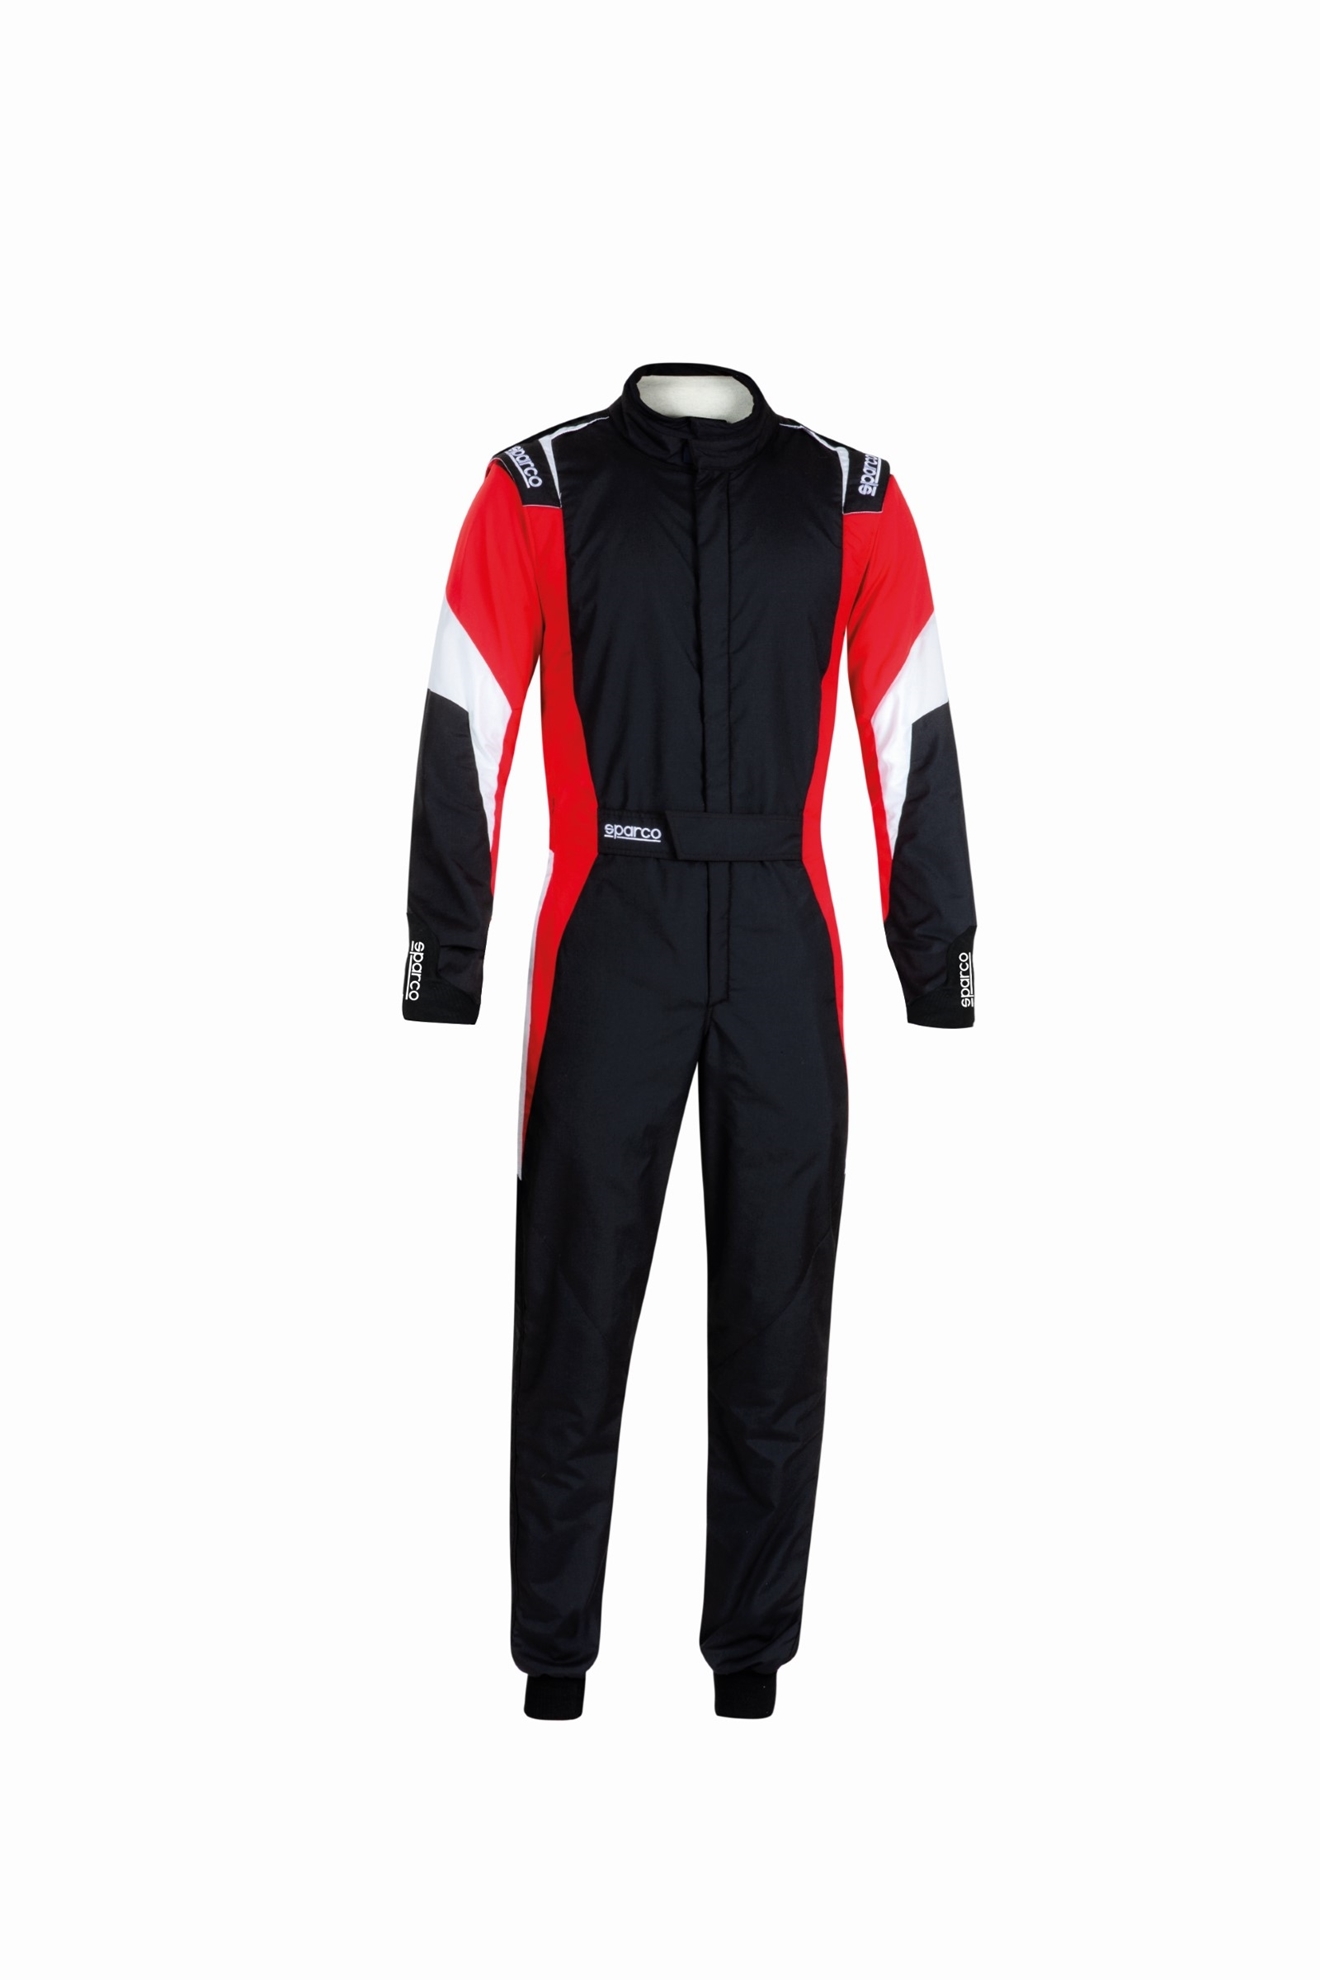 Sparco Competition 2022 Series, Fire-Proof fabric Full Racing Suit